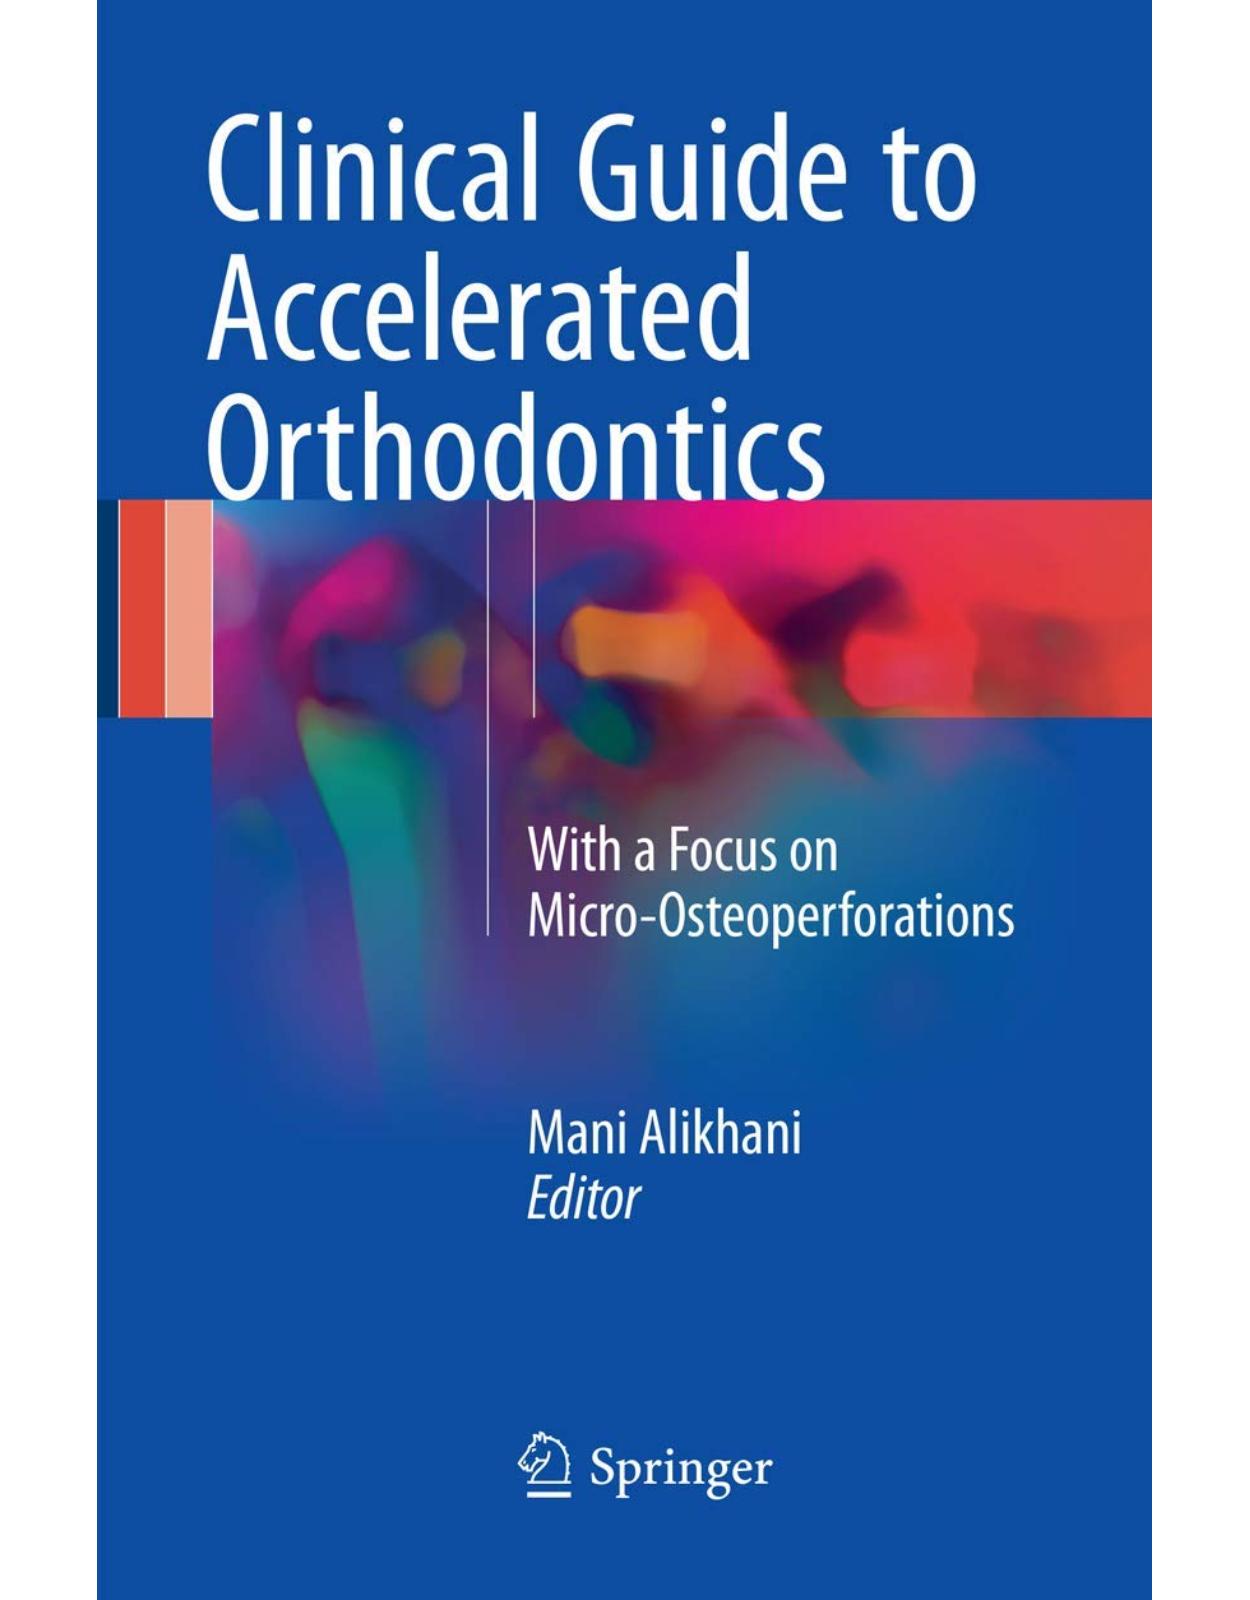 Clinical Guide to Accelerated Orthodontics: With a Focus on Micro-Osteoperforations